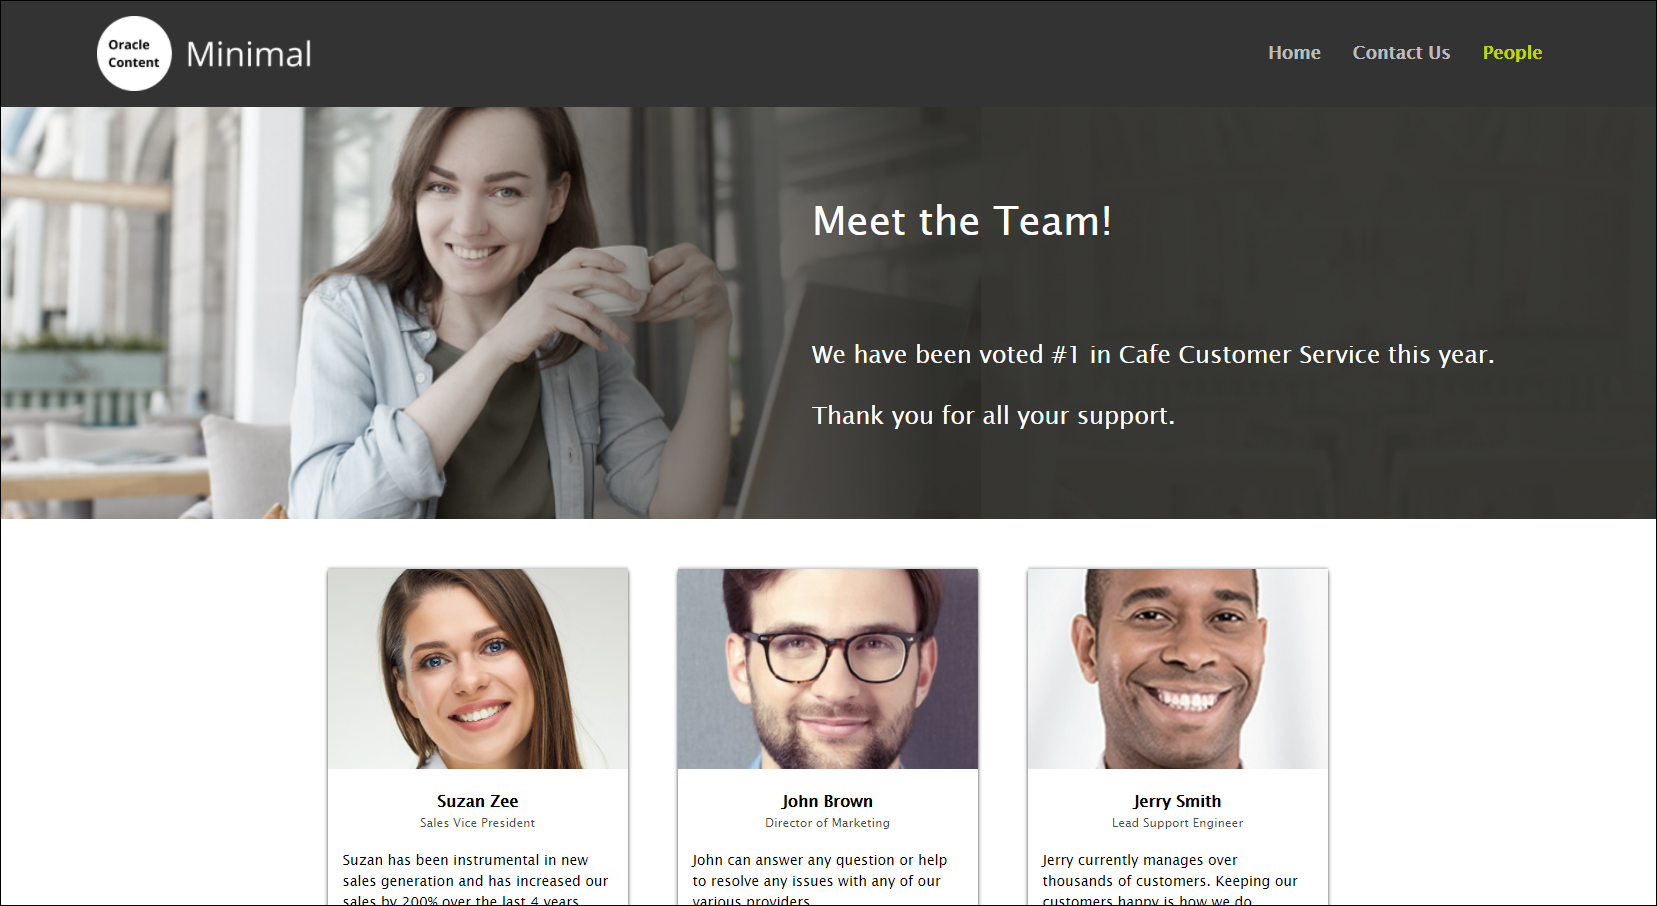 This image shows the contact us page for an Gatsby minimal site.